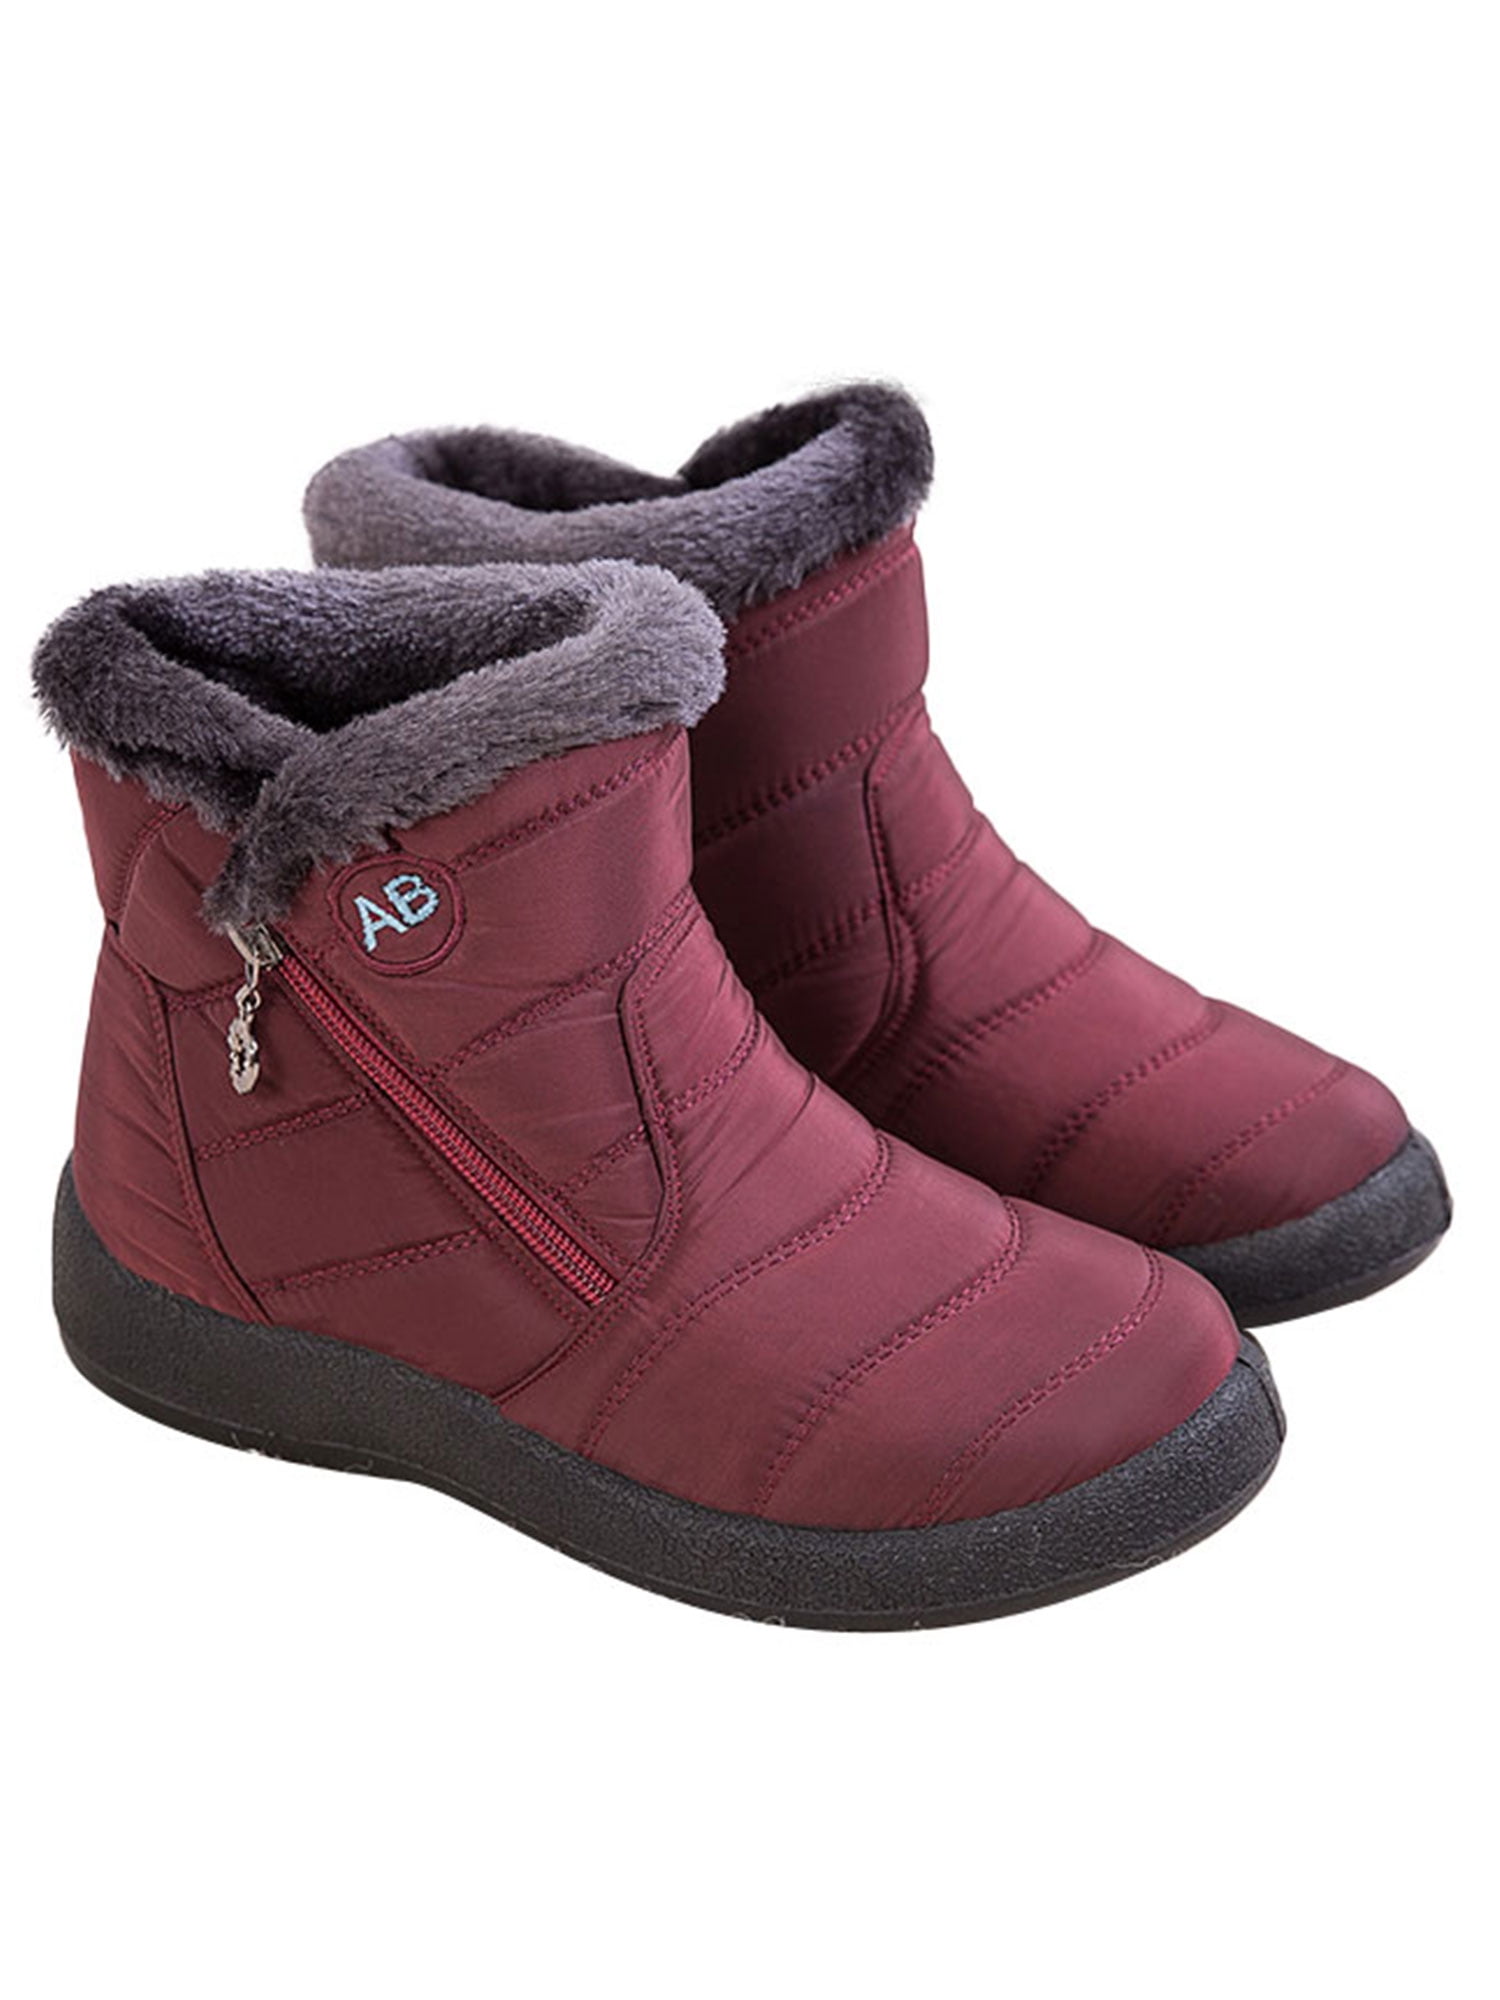 Women Winter Snow Boots Outdoor Ankle Bootie Water-Resistant Fur Lined Warm Shoes